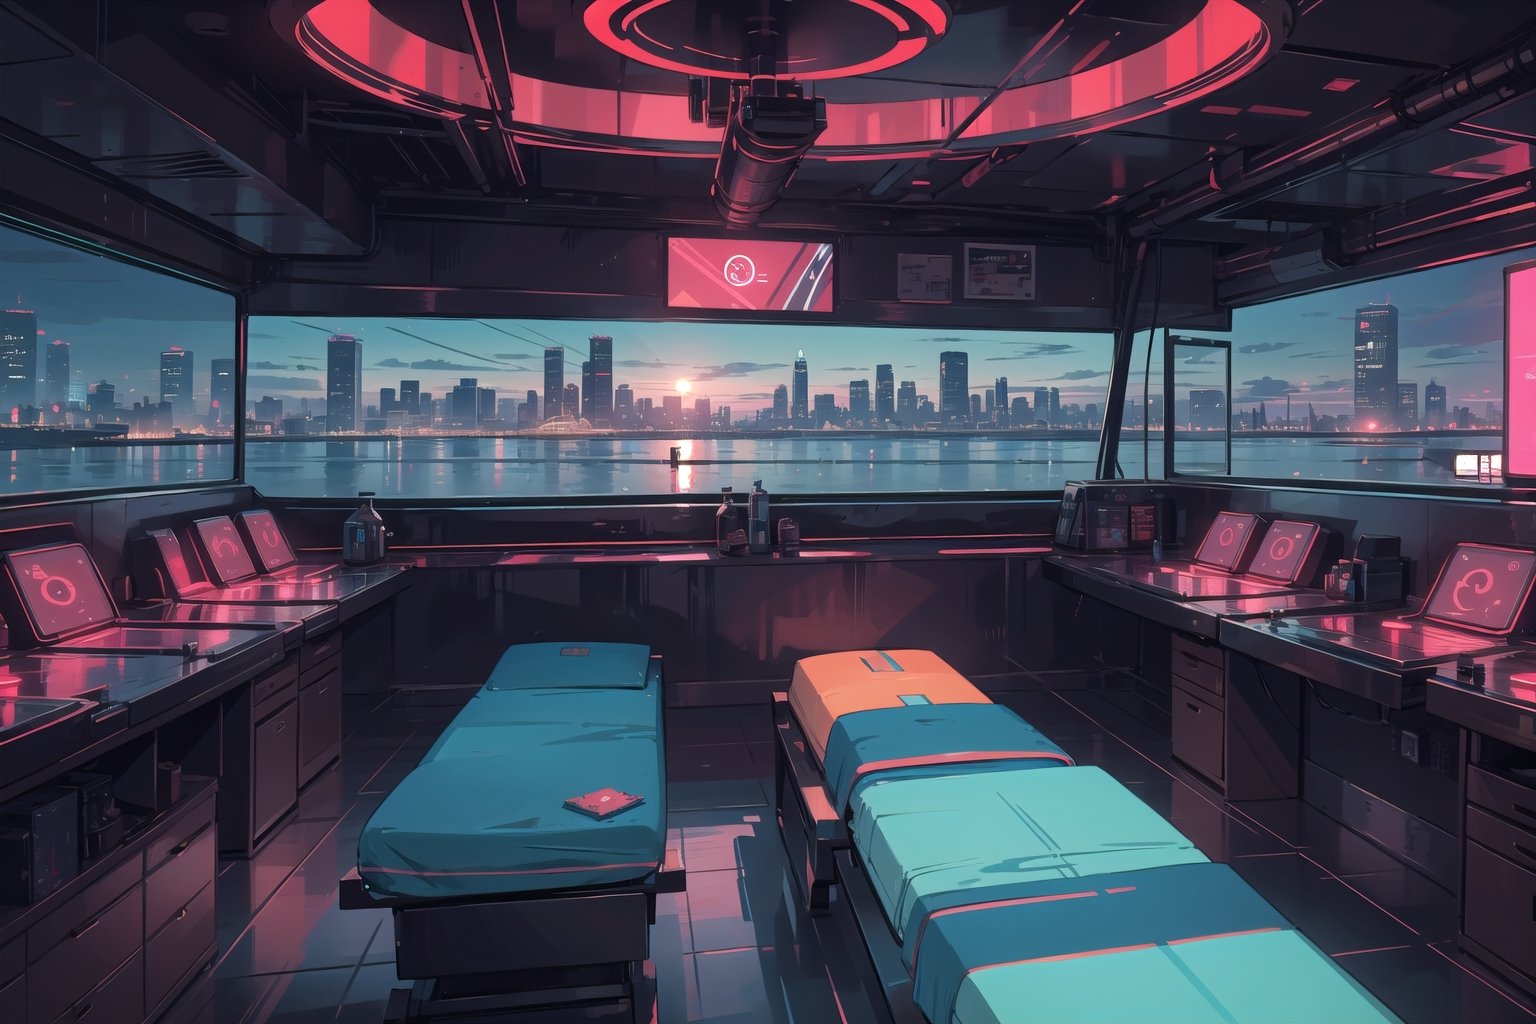 Create a digital illustration featuring a giant luxurious massage room of futuristic style, with bright red lights and a gorgeous view of a cyberpunk city.